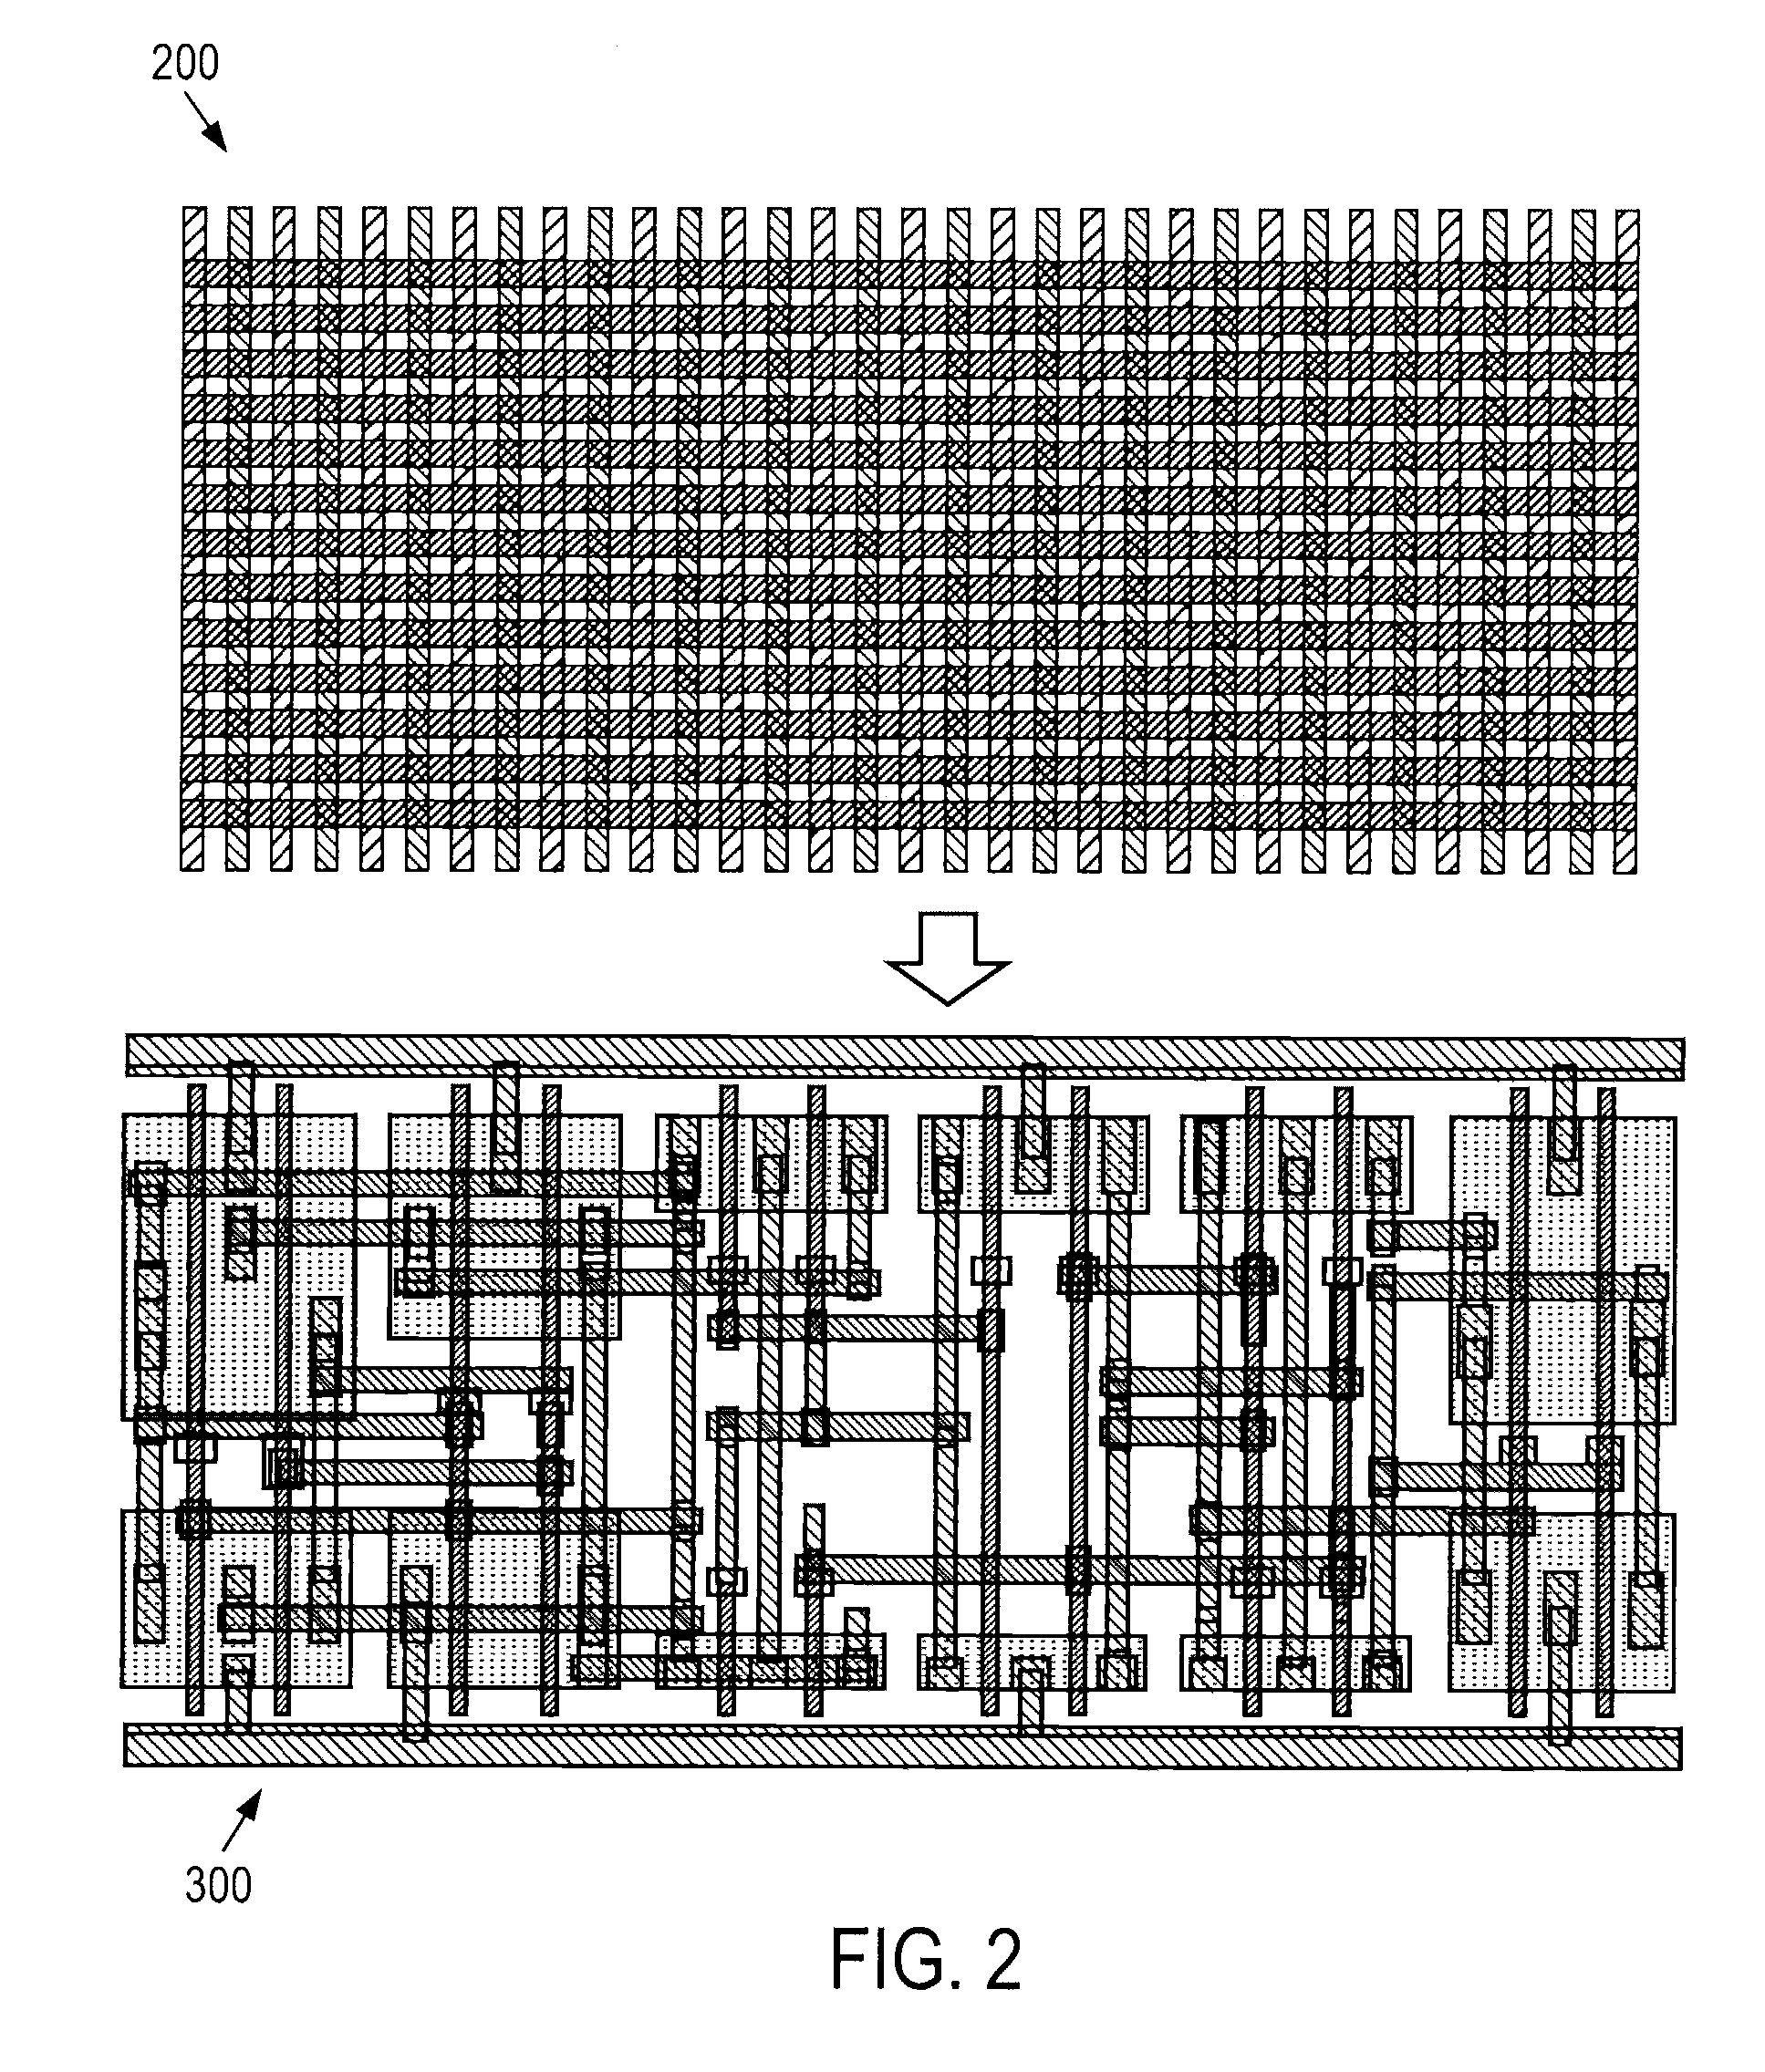 Method and process for design of integrated circuits using regular geometry patterns to obtain geometrically consistent component features